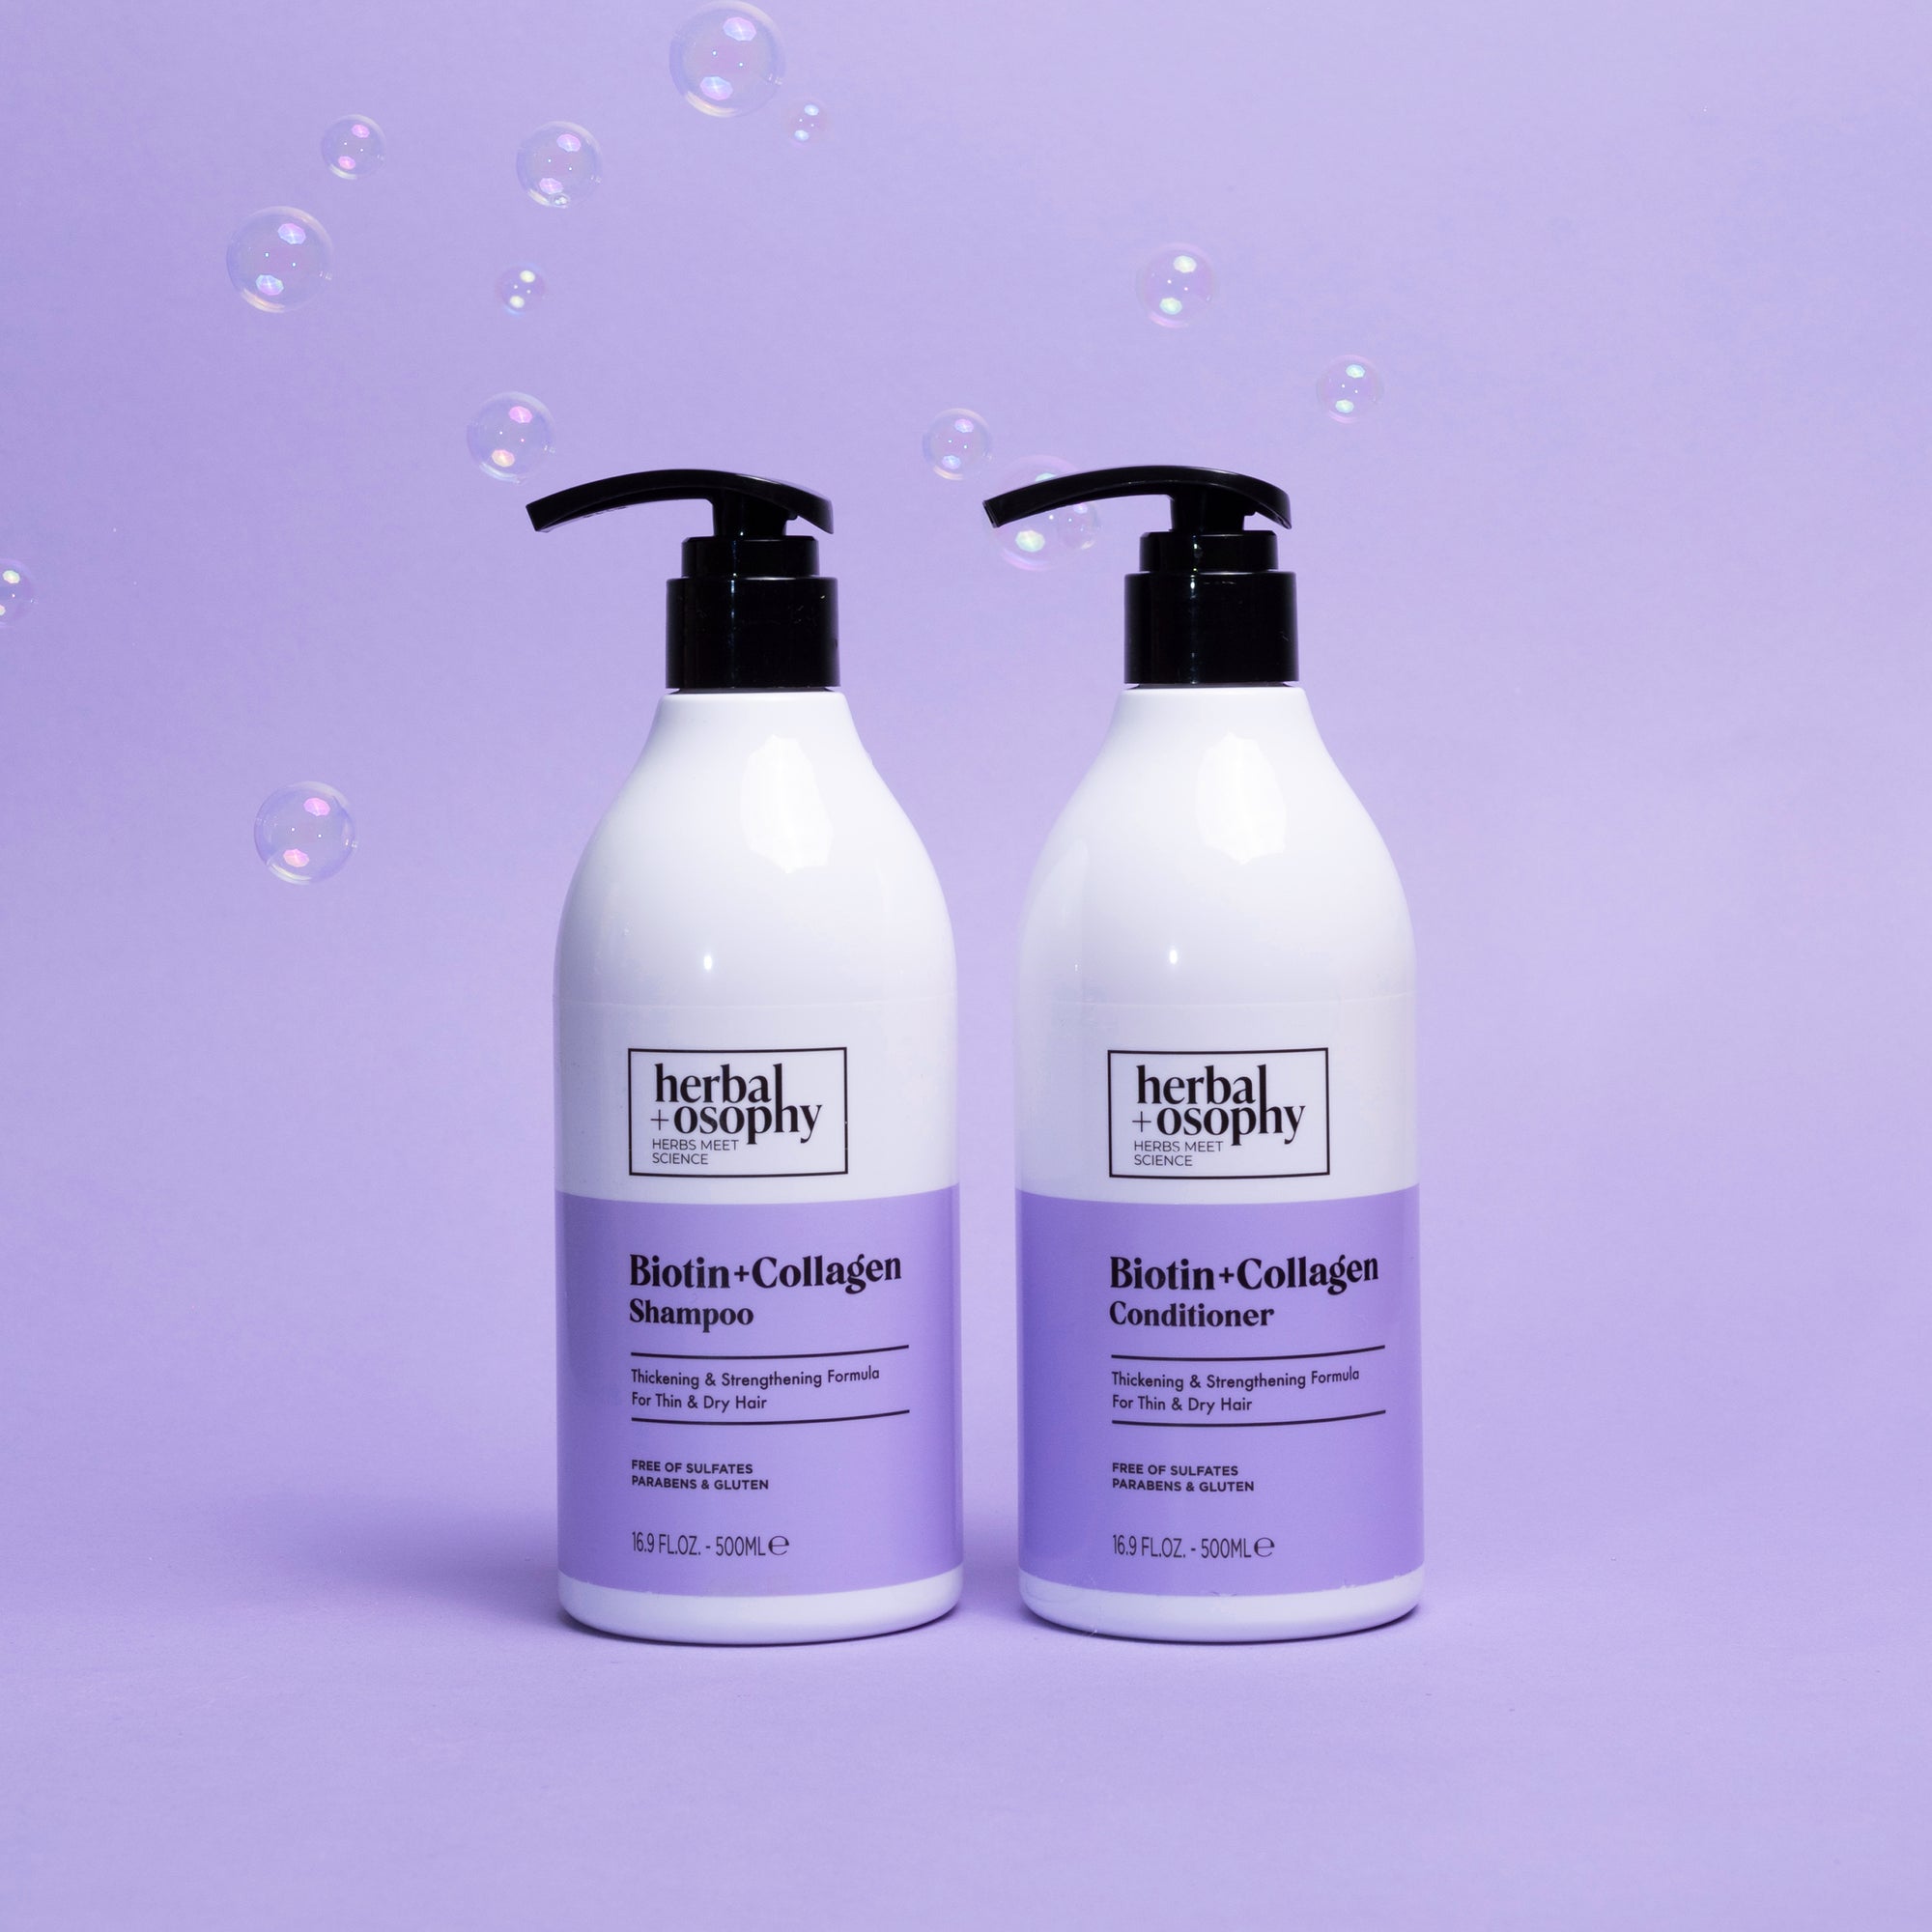 Biotin + Collagen Shampoo and conditioner on purple background with bubbles